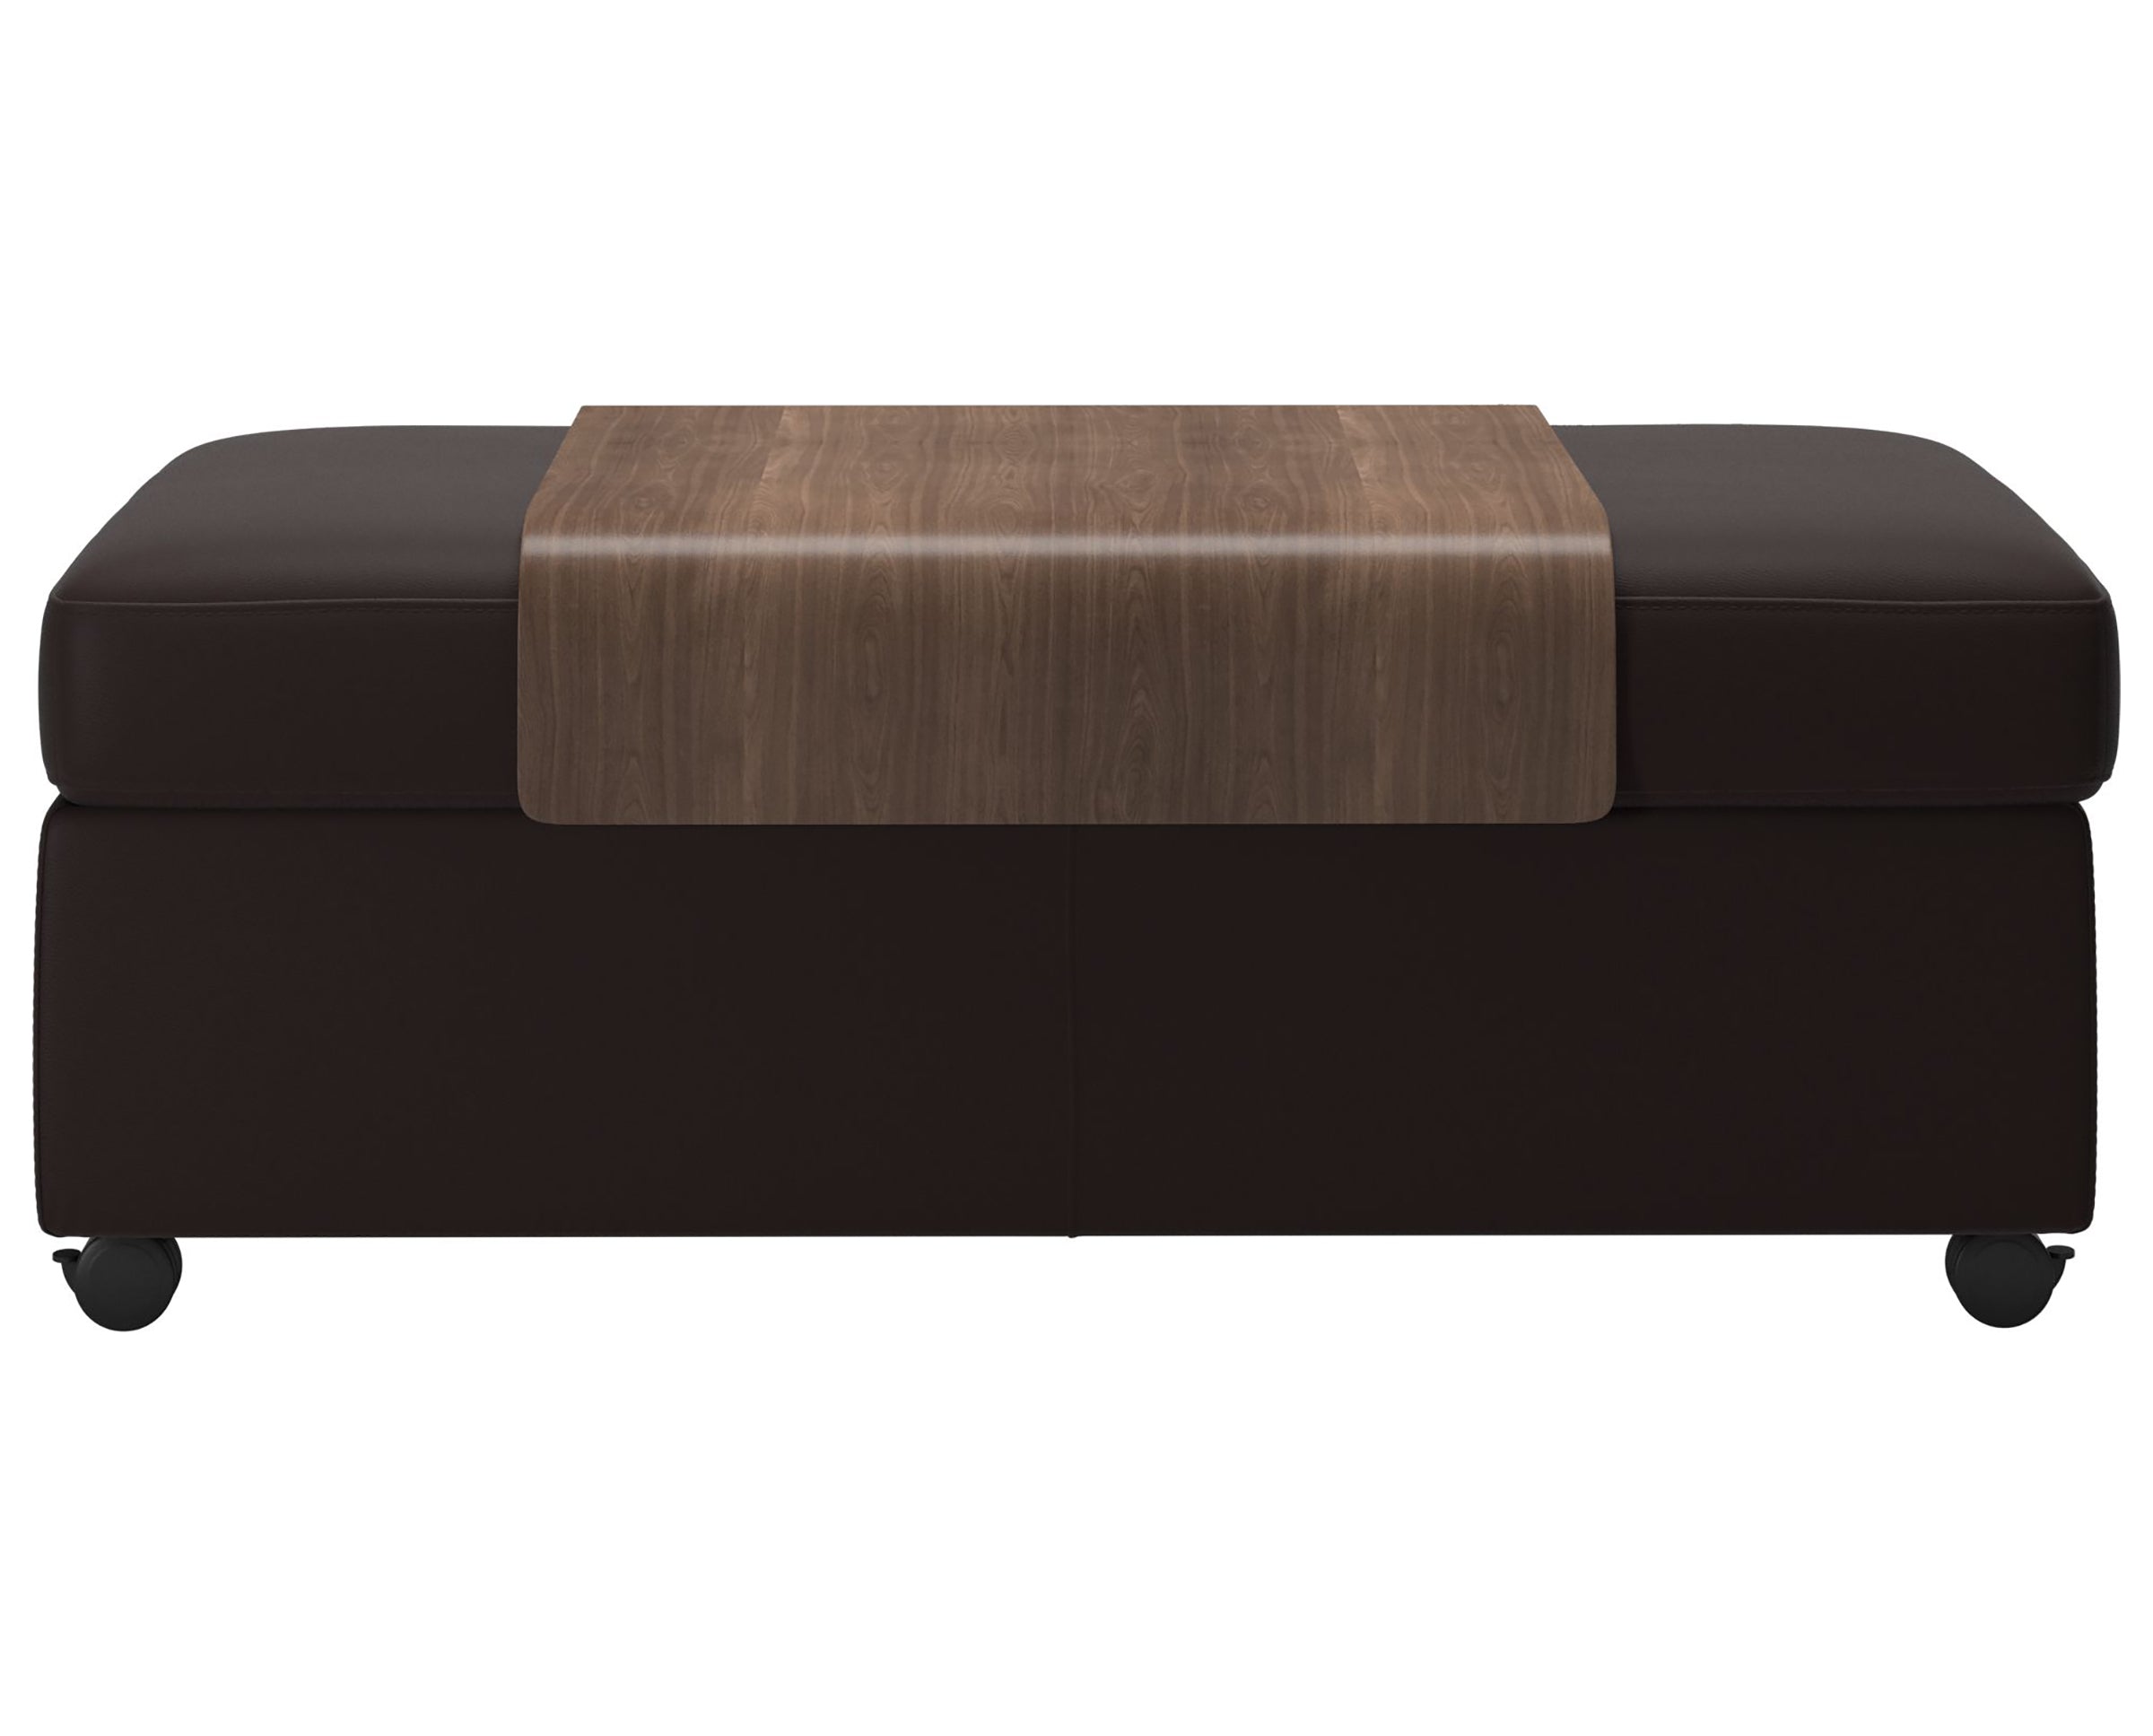 Paloma Leather Chocolate and Walnut Finish | Stressless Double Ottoman with Table | Valley Ridge Furniture